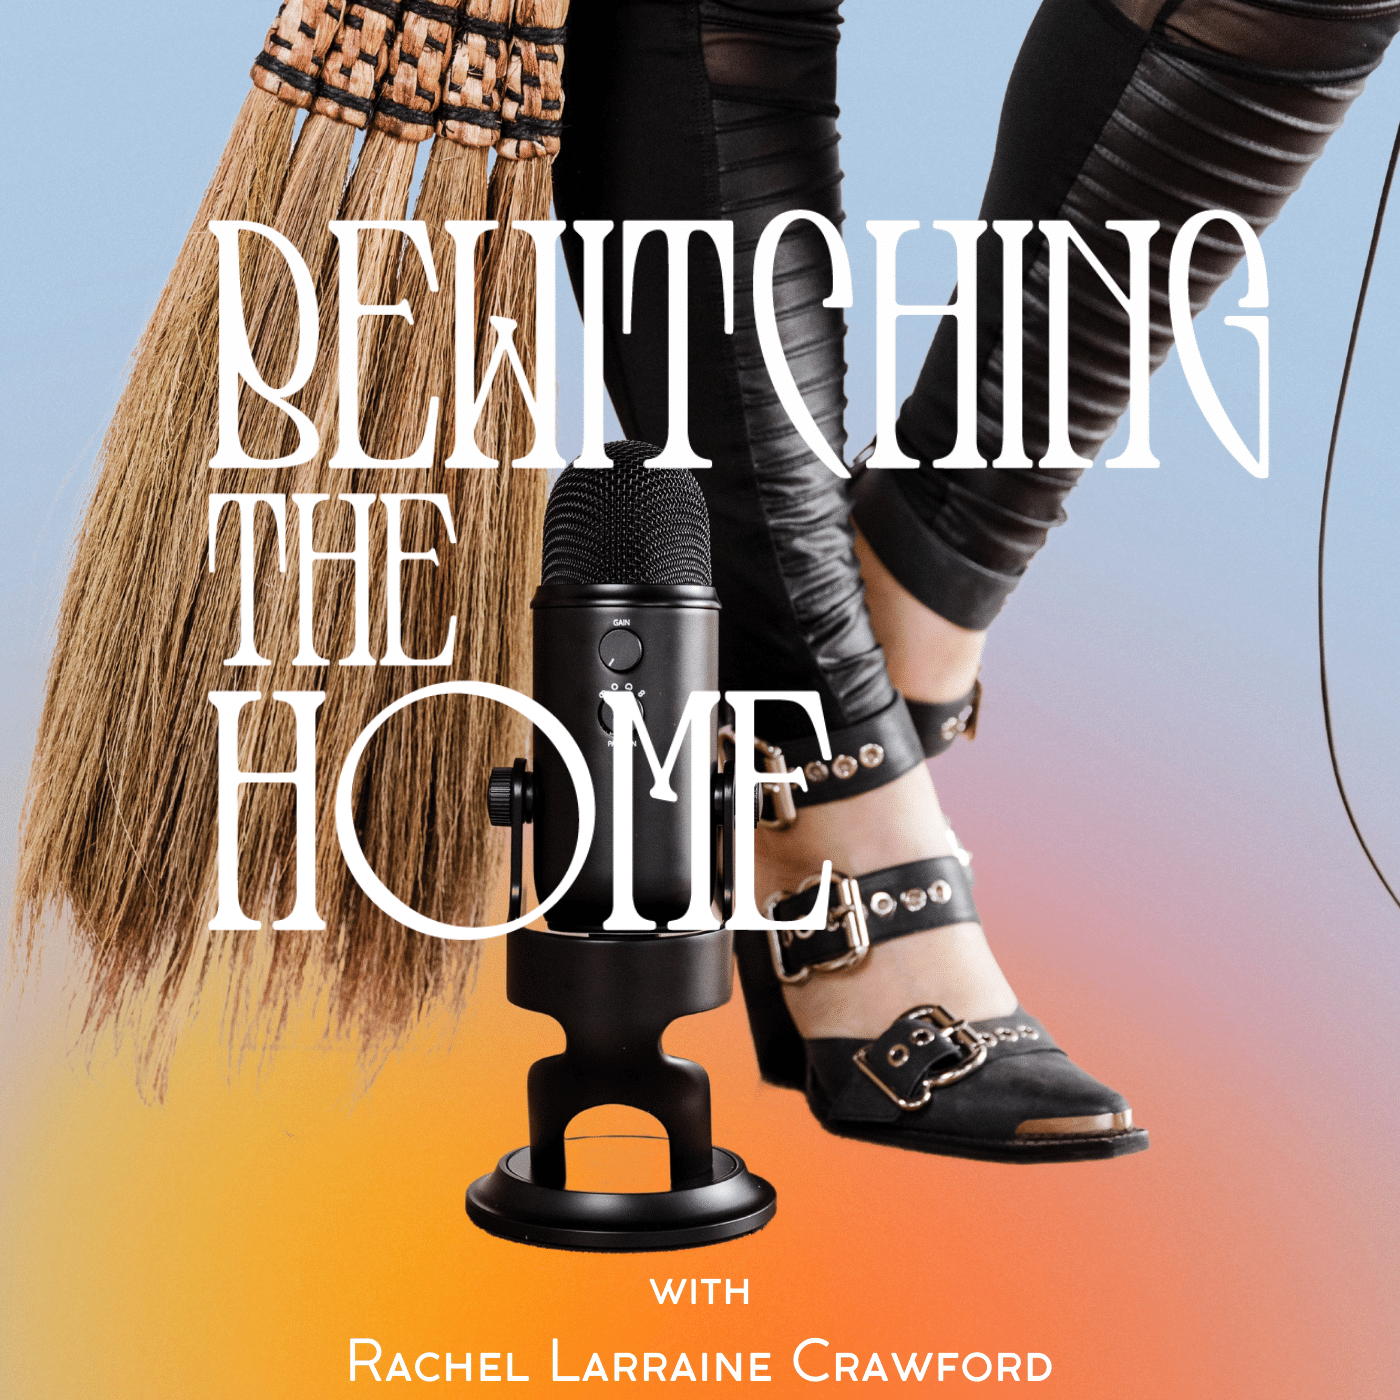 Artwork for Bewitching the Home